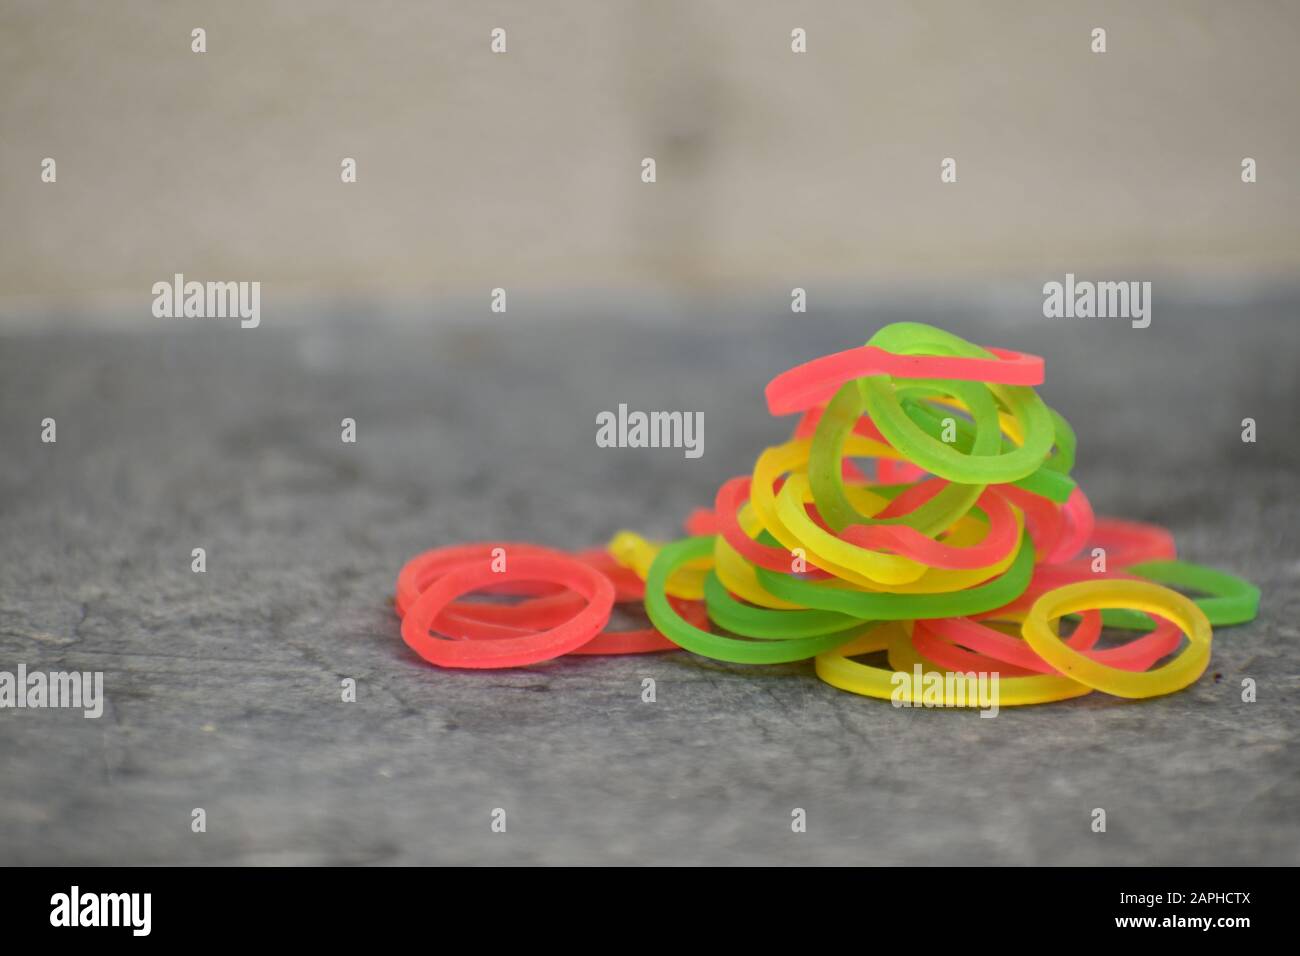 Colorful rubber bands in black background. Stock Photo